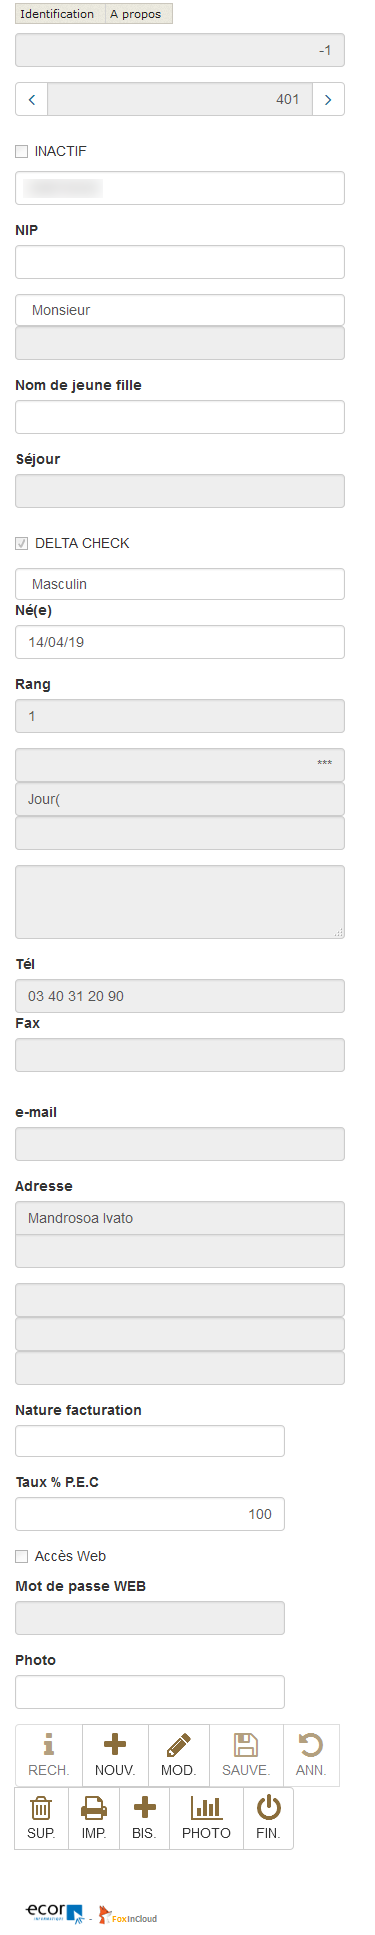 Web form with 'Bootstrap' rendering, viewed on a very small screen like a smartphone